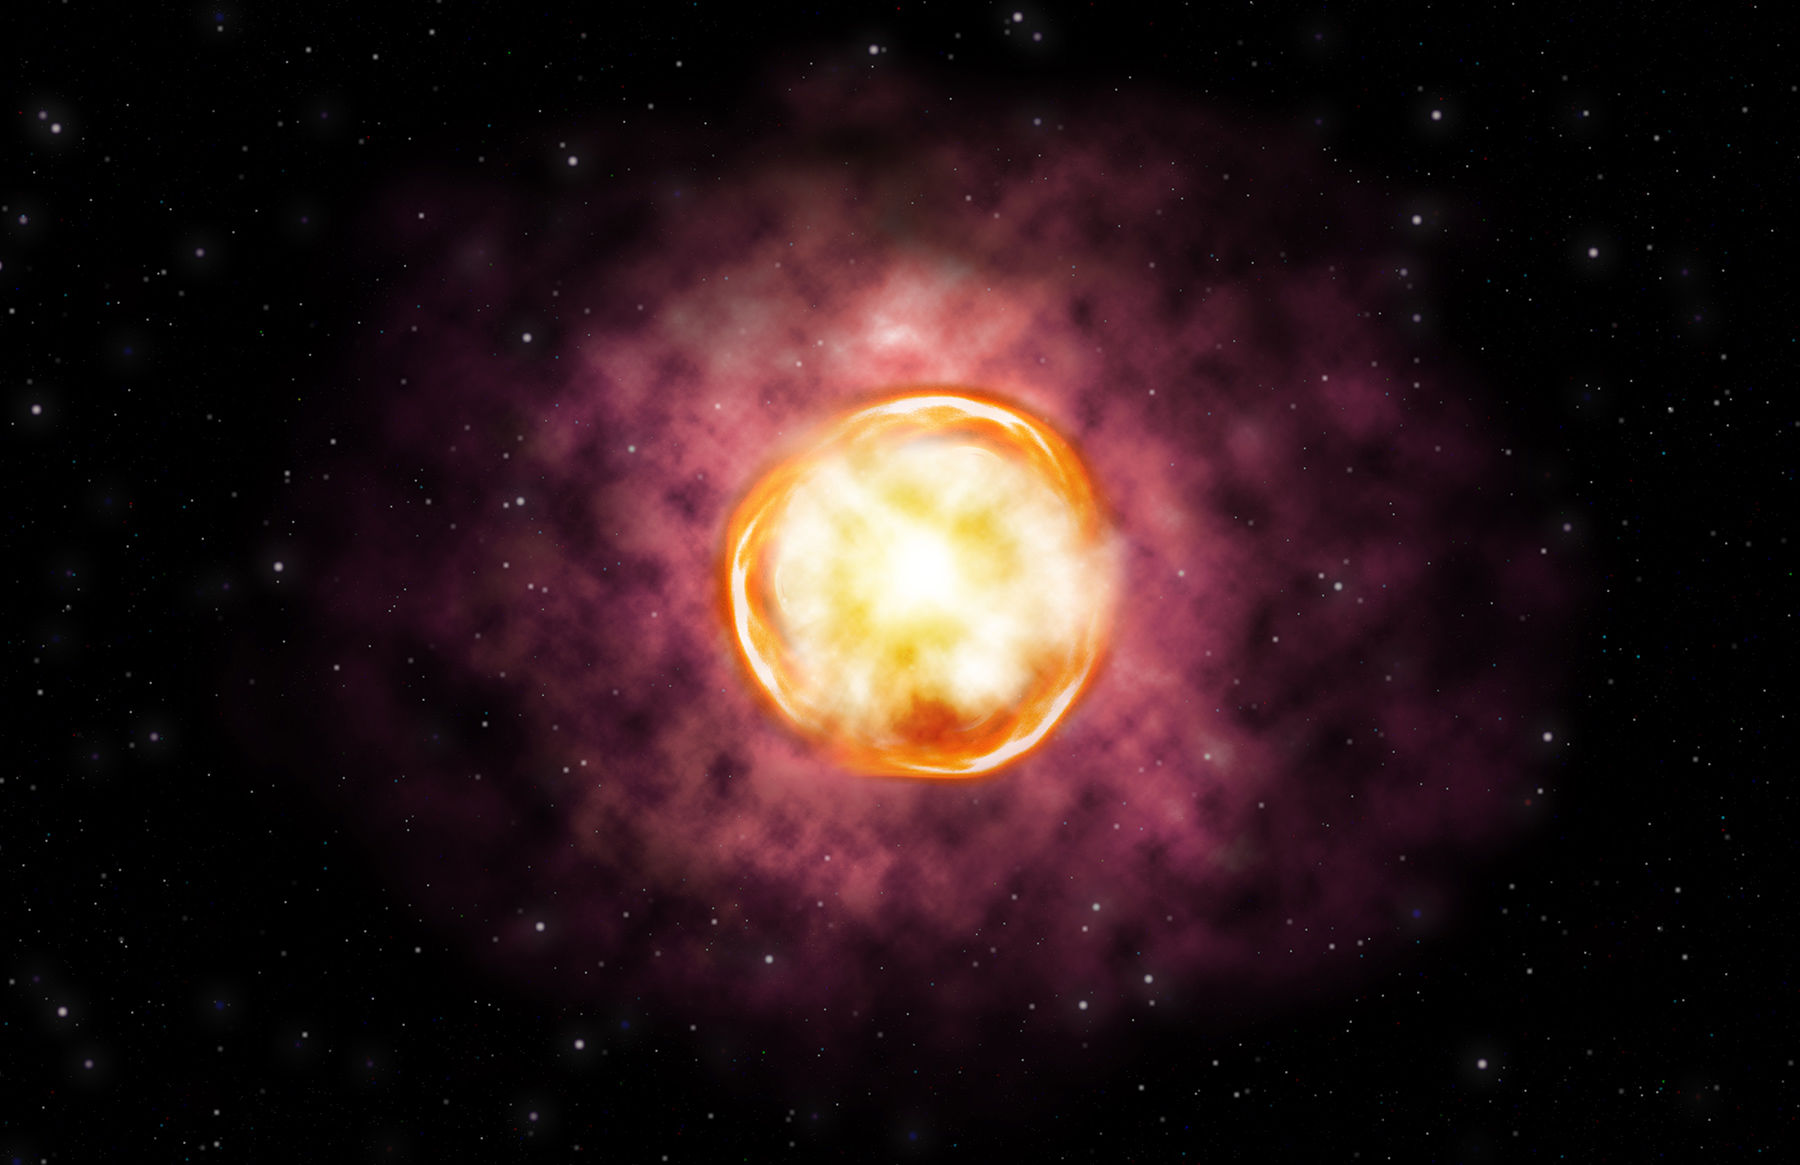 Across the Universe, a star exploded so violently that it *completely* annihilated itself